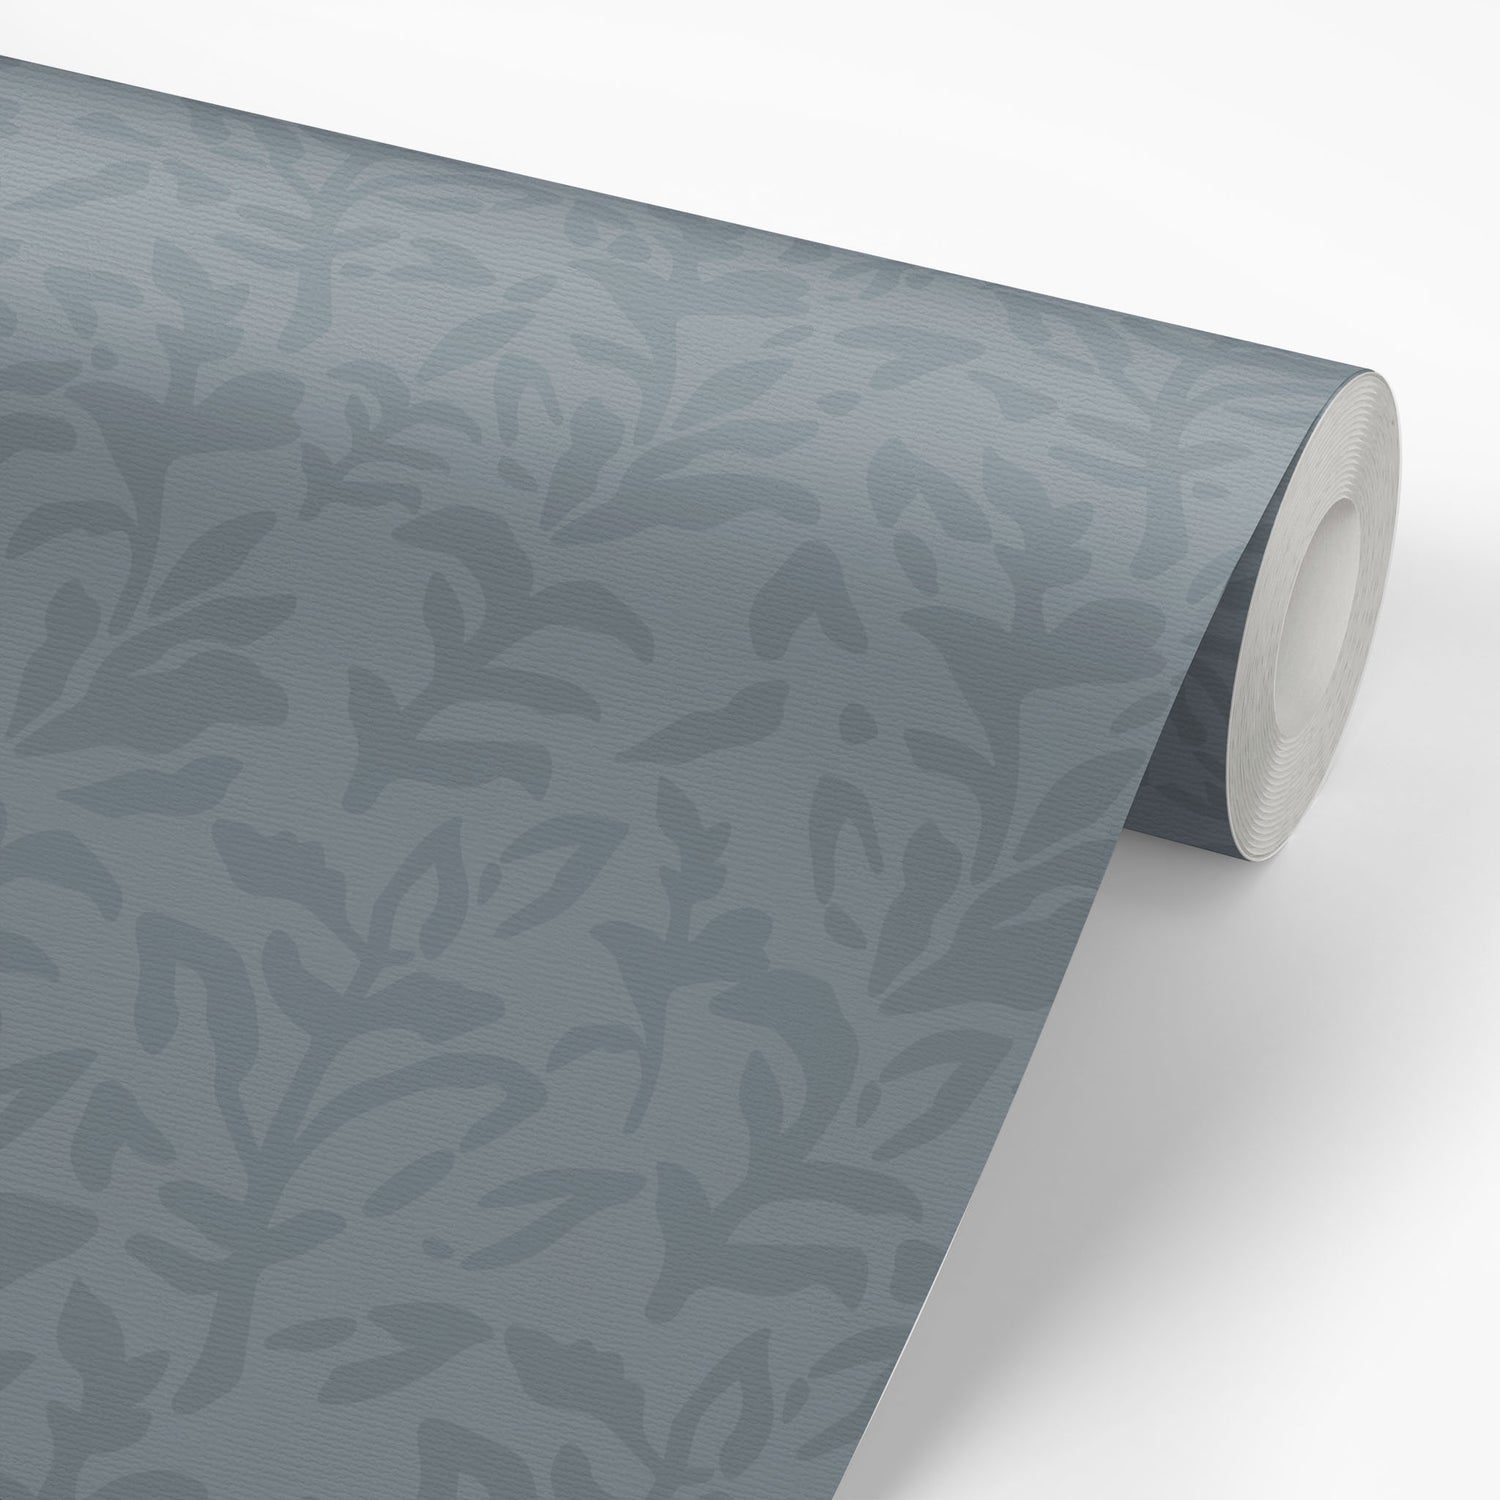 Transform your walls with the elegant and timeless Belmont Wallpaper shown on a wallpaper roll.